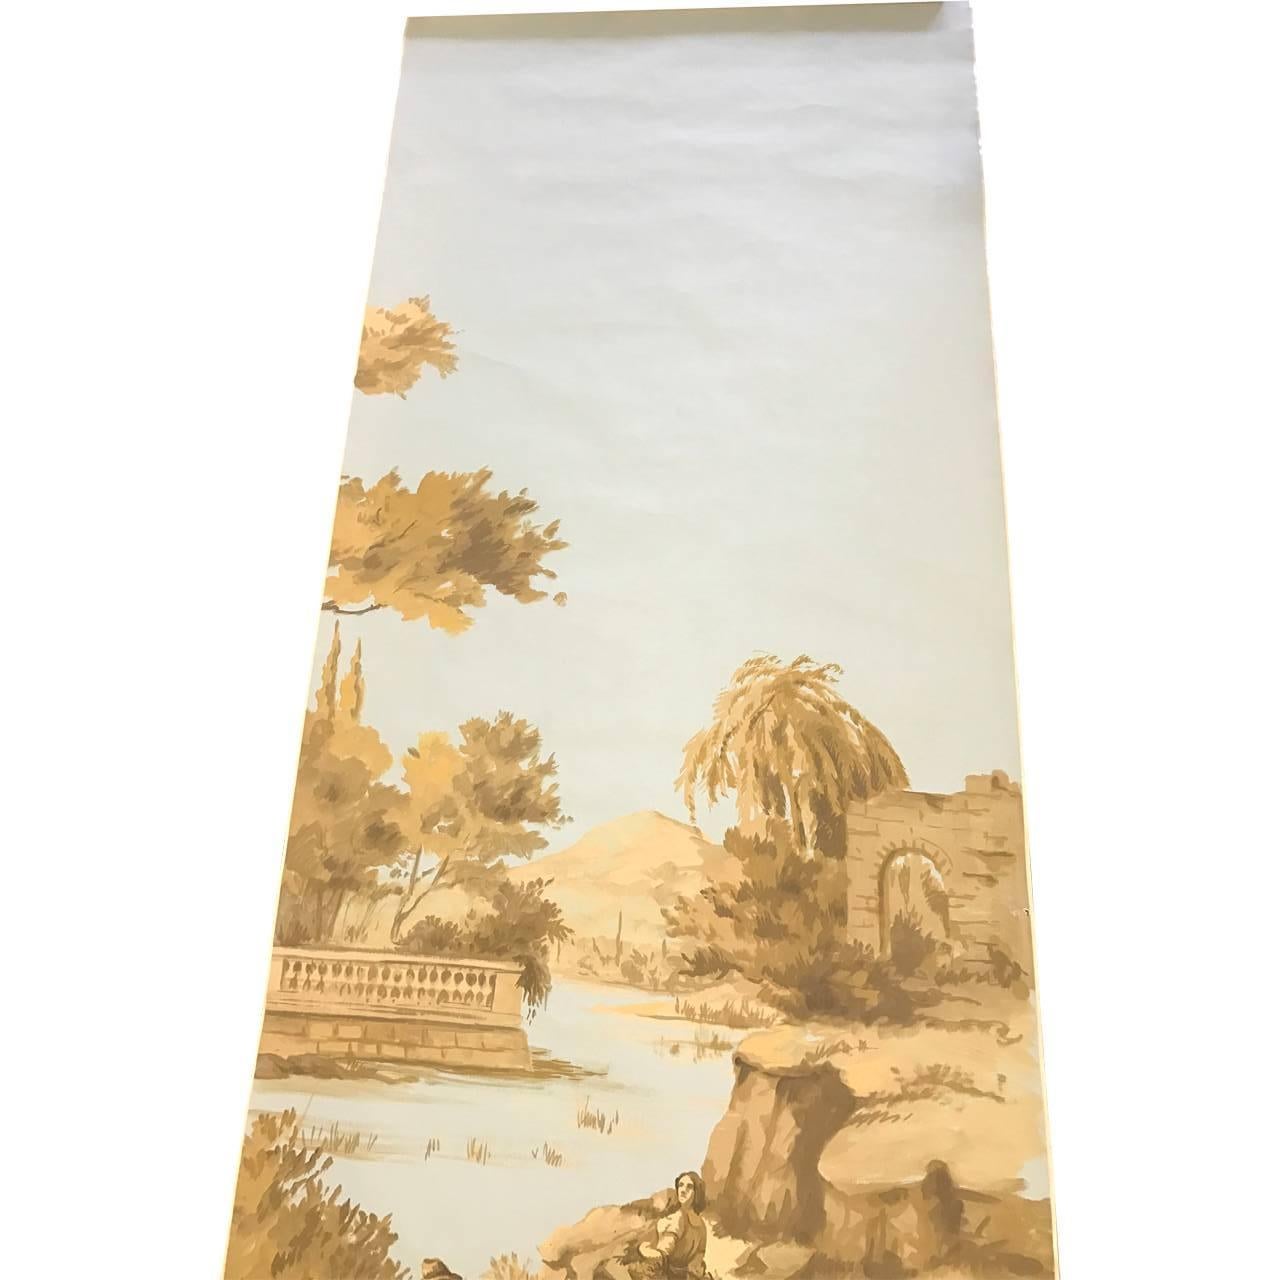 French Provincial Hand-Painted Gracie Wallpaper Panels, French Toile Countryside Scene